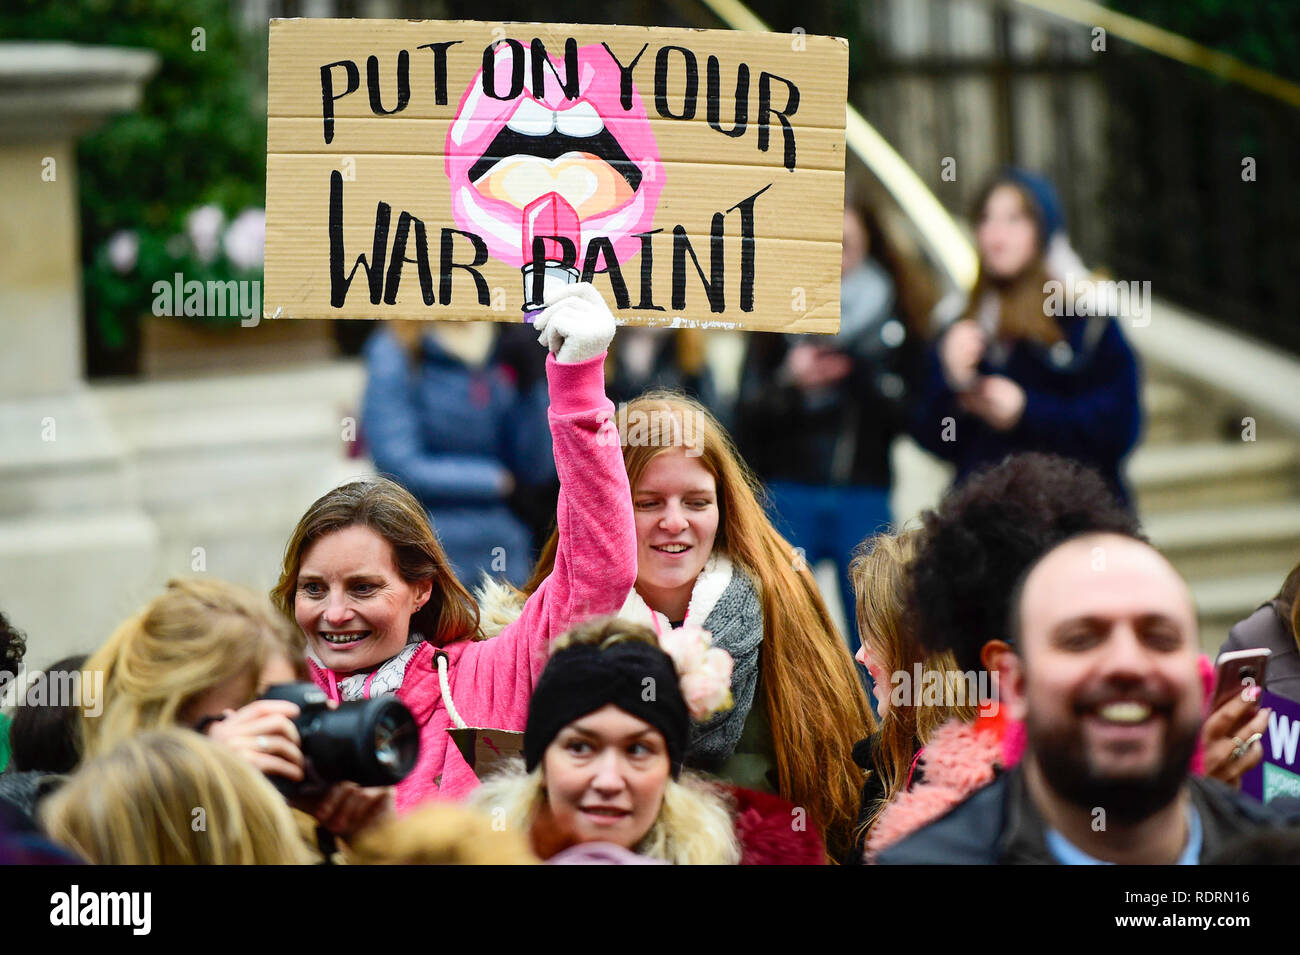 London, UK. 19th Jan, 2019. A girl carries a sign during the Women's March in the capital, one of 30 such worldwide marches protesting against violence against women and the negative impact of austerity policies. London's theme this year is 'Bread and Roses', honouring Polish-American suffragette Rose Schneiderman who, in 1911 said 'The worker must have bread but she must have roses too', in response to a factory fire where 146 mainly female garment workers died. Credit: Stephen Chung/Alamy Live News Stock Photo